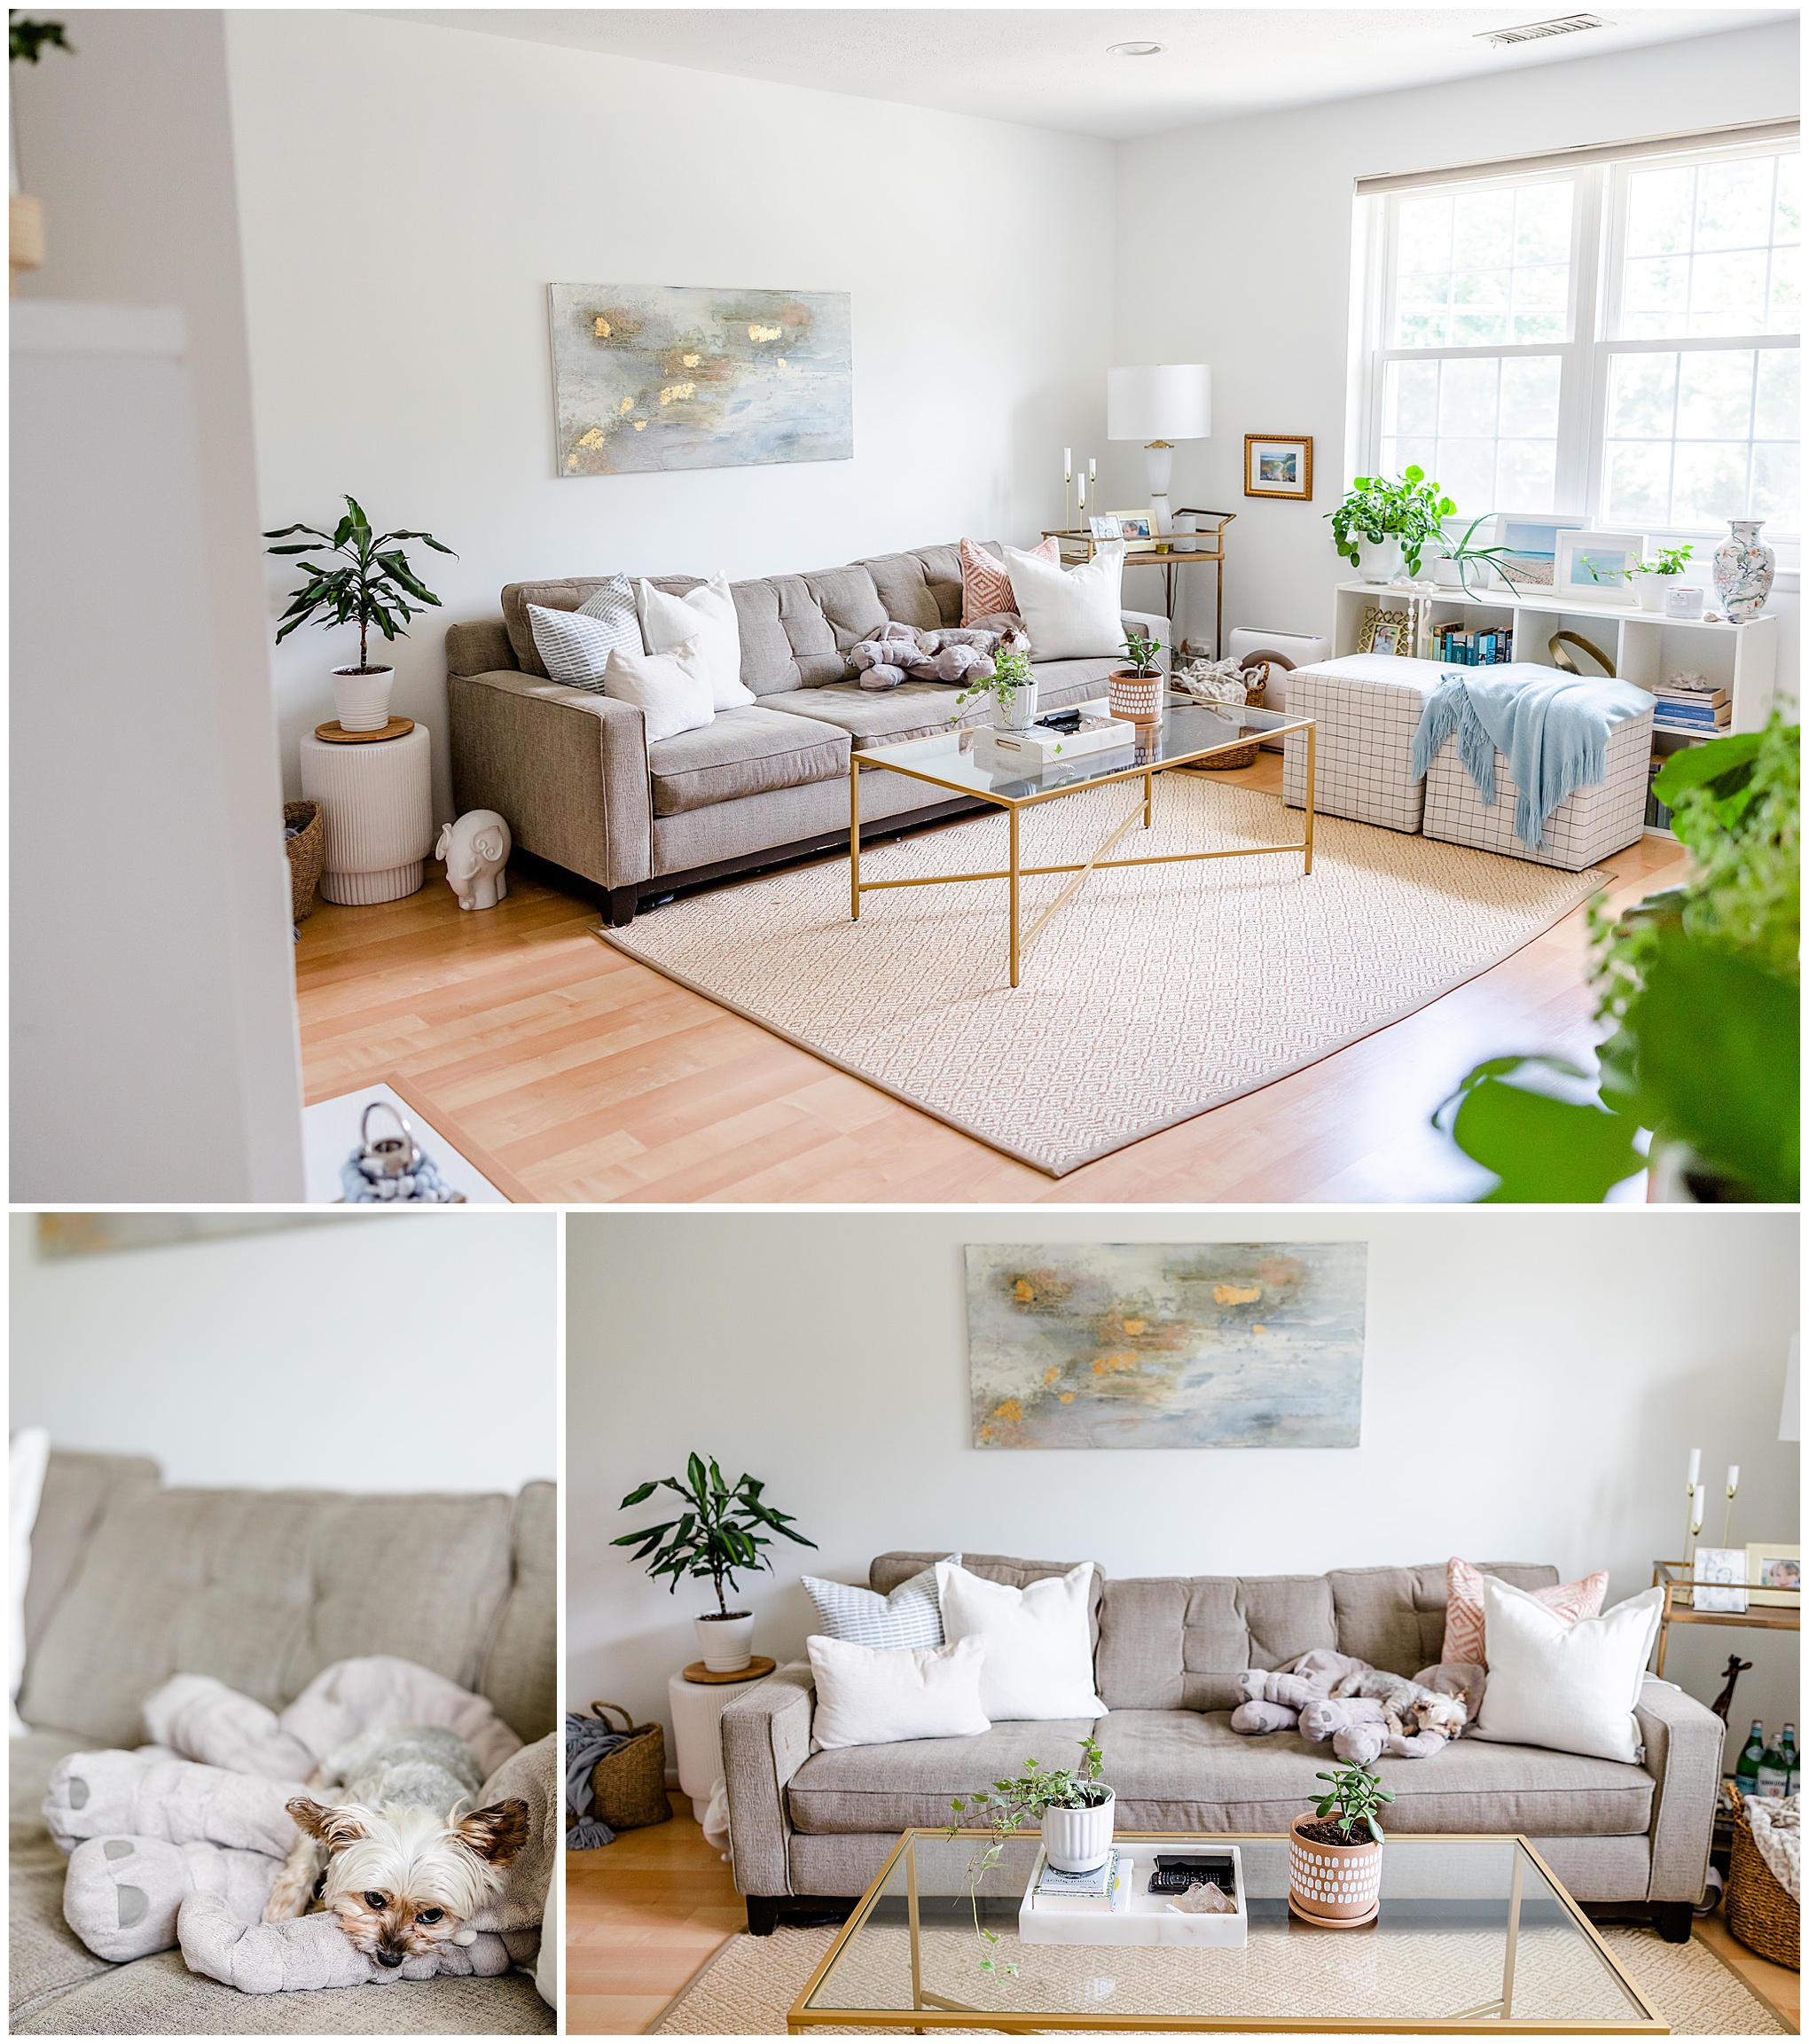 living room tour, apartment tour, photographer's apartment, photographer's life, photographer's aesthetic, Arlington condo living, apartment living, white aesthetic, white and gold aesthetic, condo decor, small space decorating, minimalist decor, subtle beach decor, Rachel E.H. Photography, DC photographer, gray couch, glass coffee table, dog on couch, white pillows